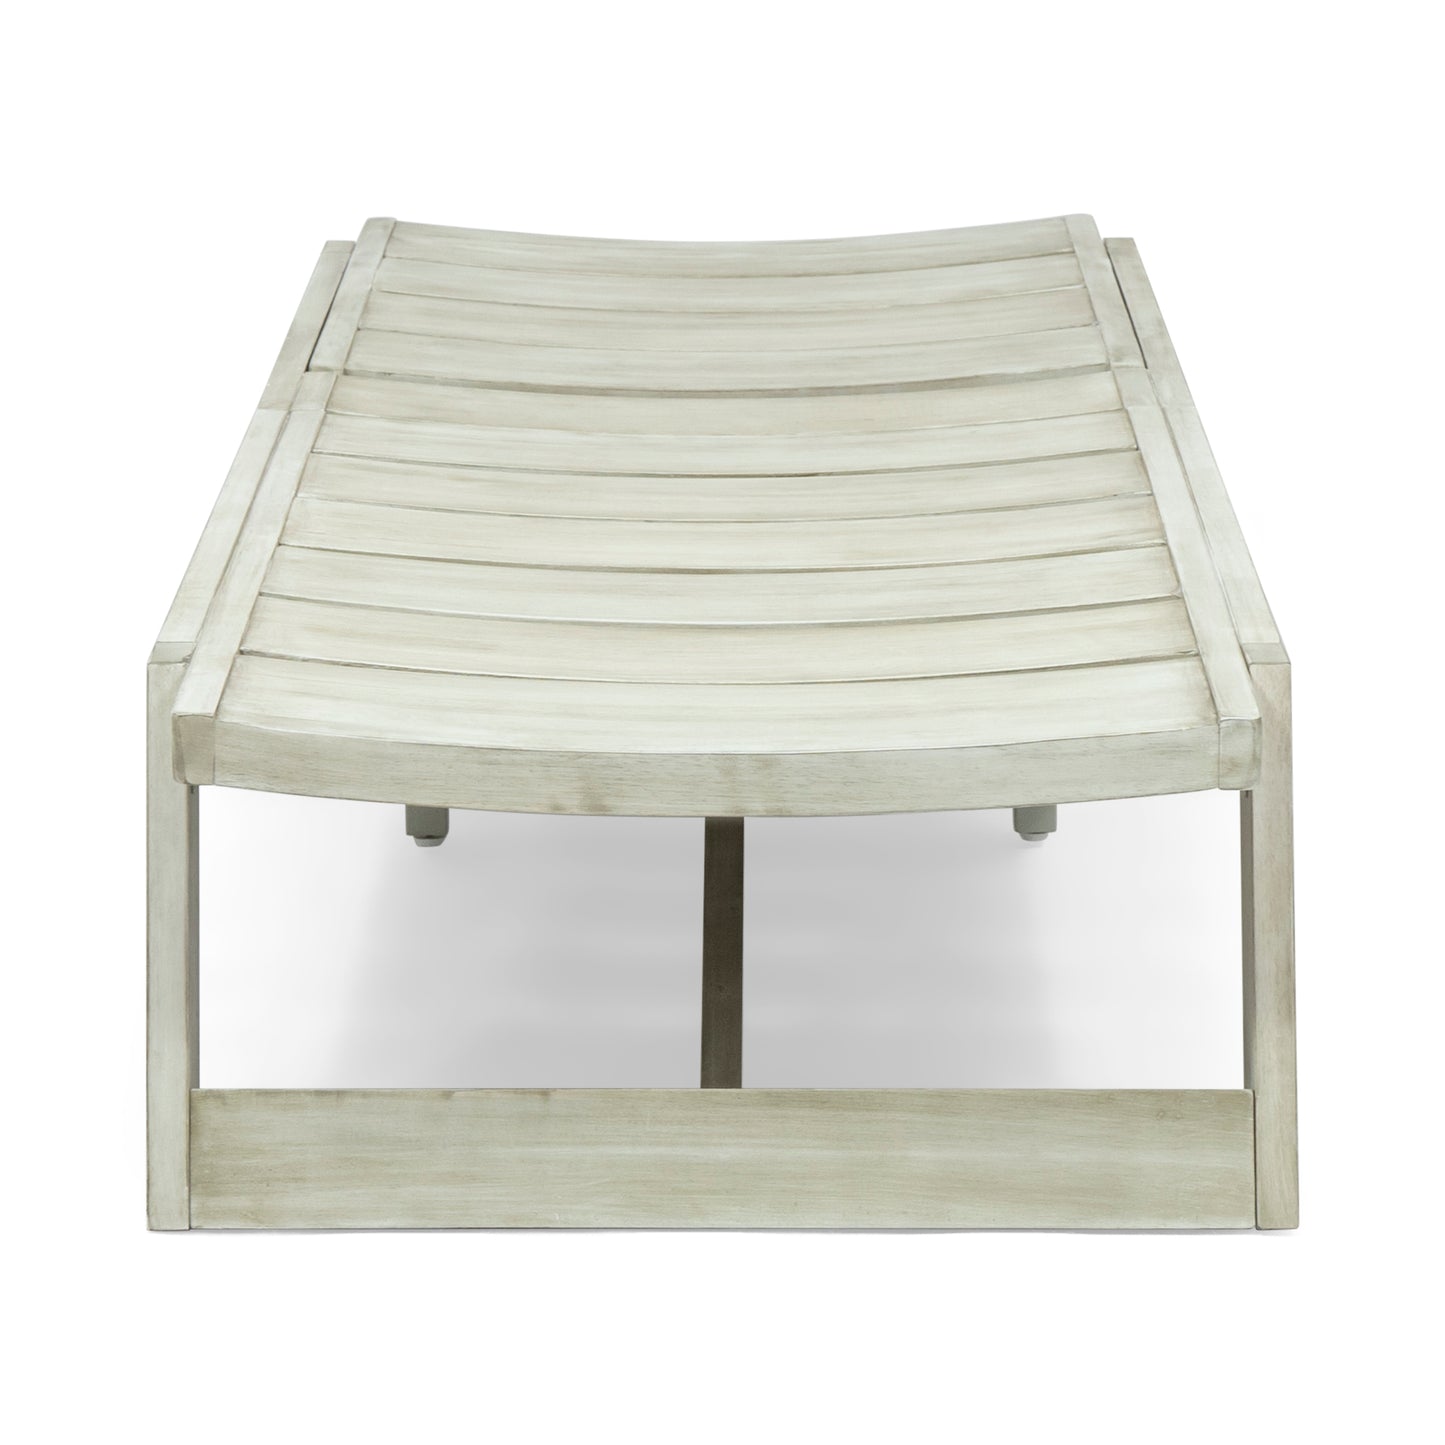 Melissa Outdoor Acacia Wood Chaise Lounge (Set of 4)